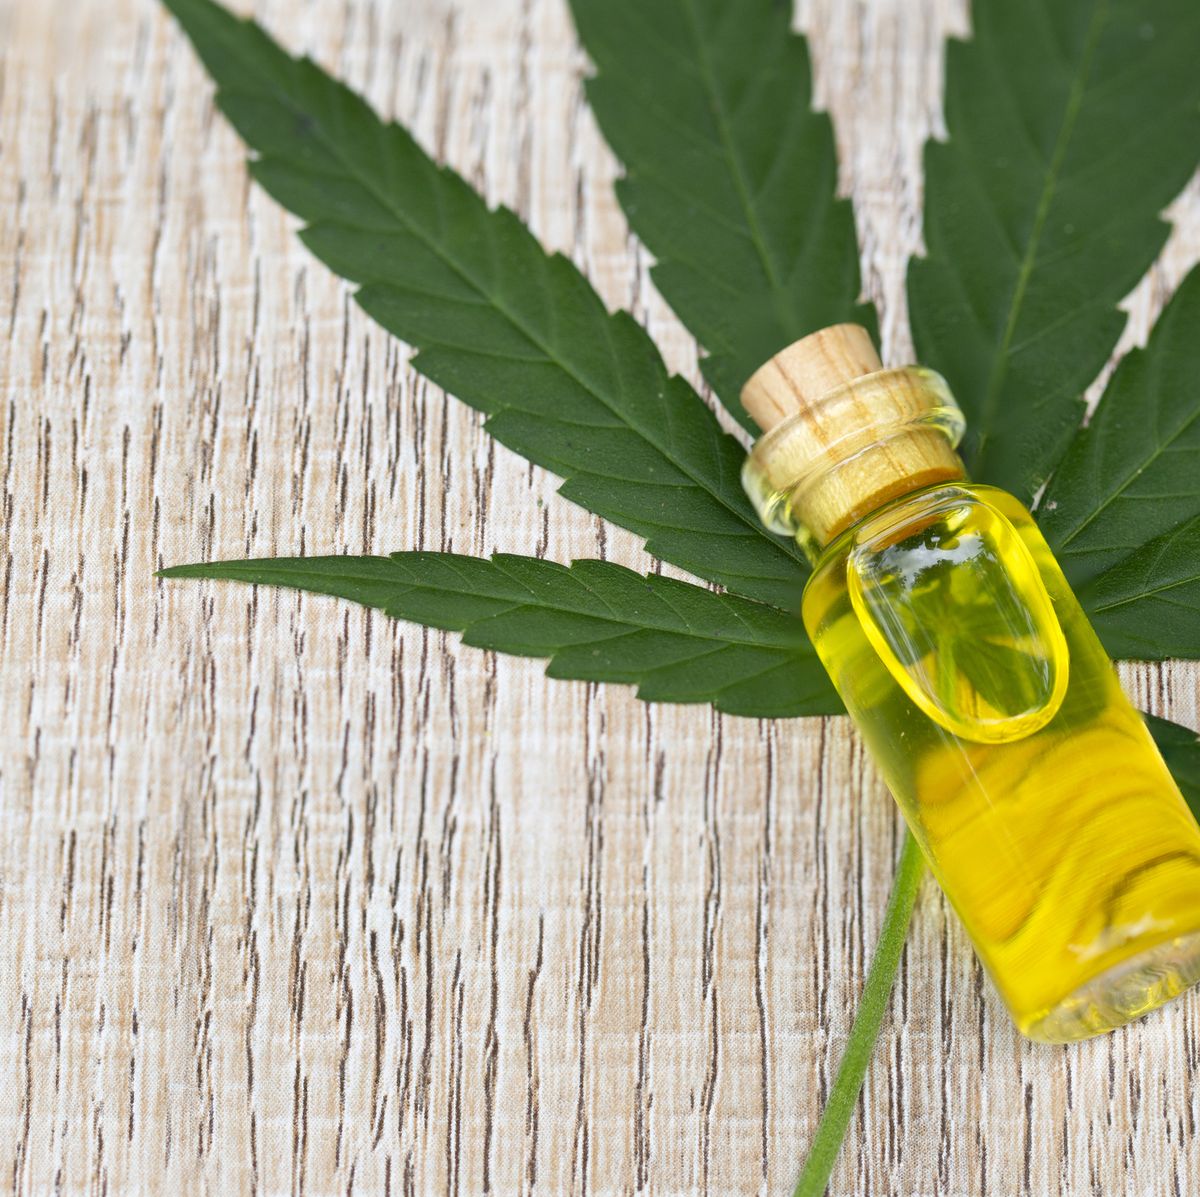 CBD oil for anxiety: research, benefits and dosage suggestions